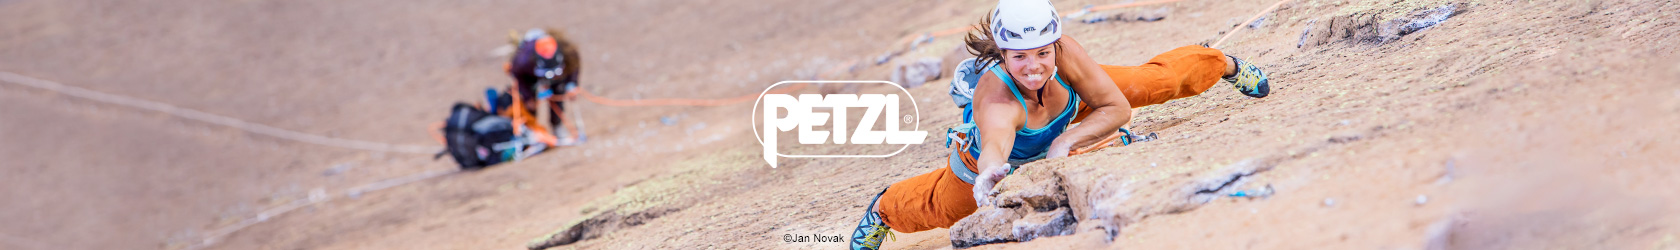 Two people are almost at the top of a rock, wearing and using Petzl gear.